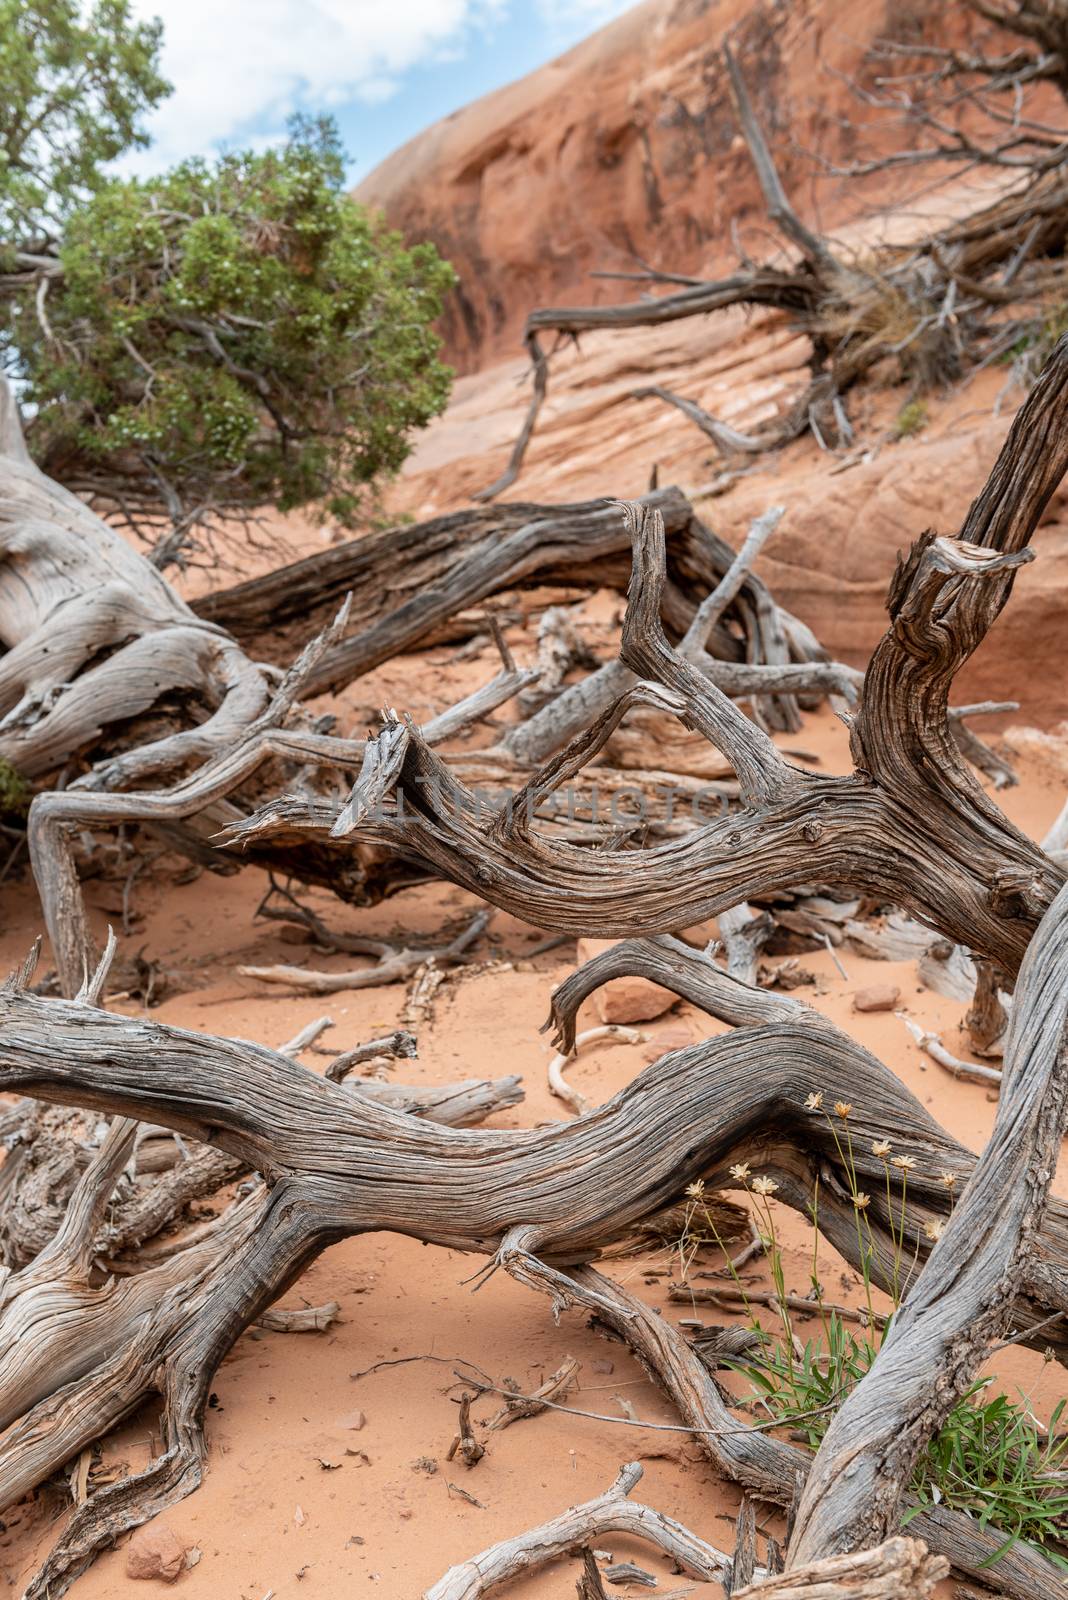 Fallen dry tree branches on Devils Garden Trail in Arches National Park, Utah by Njean